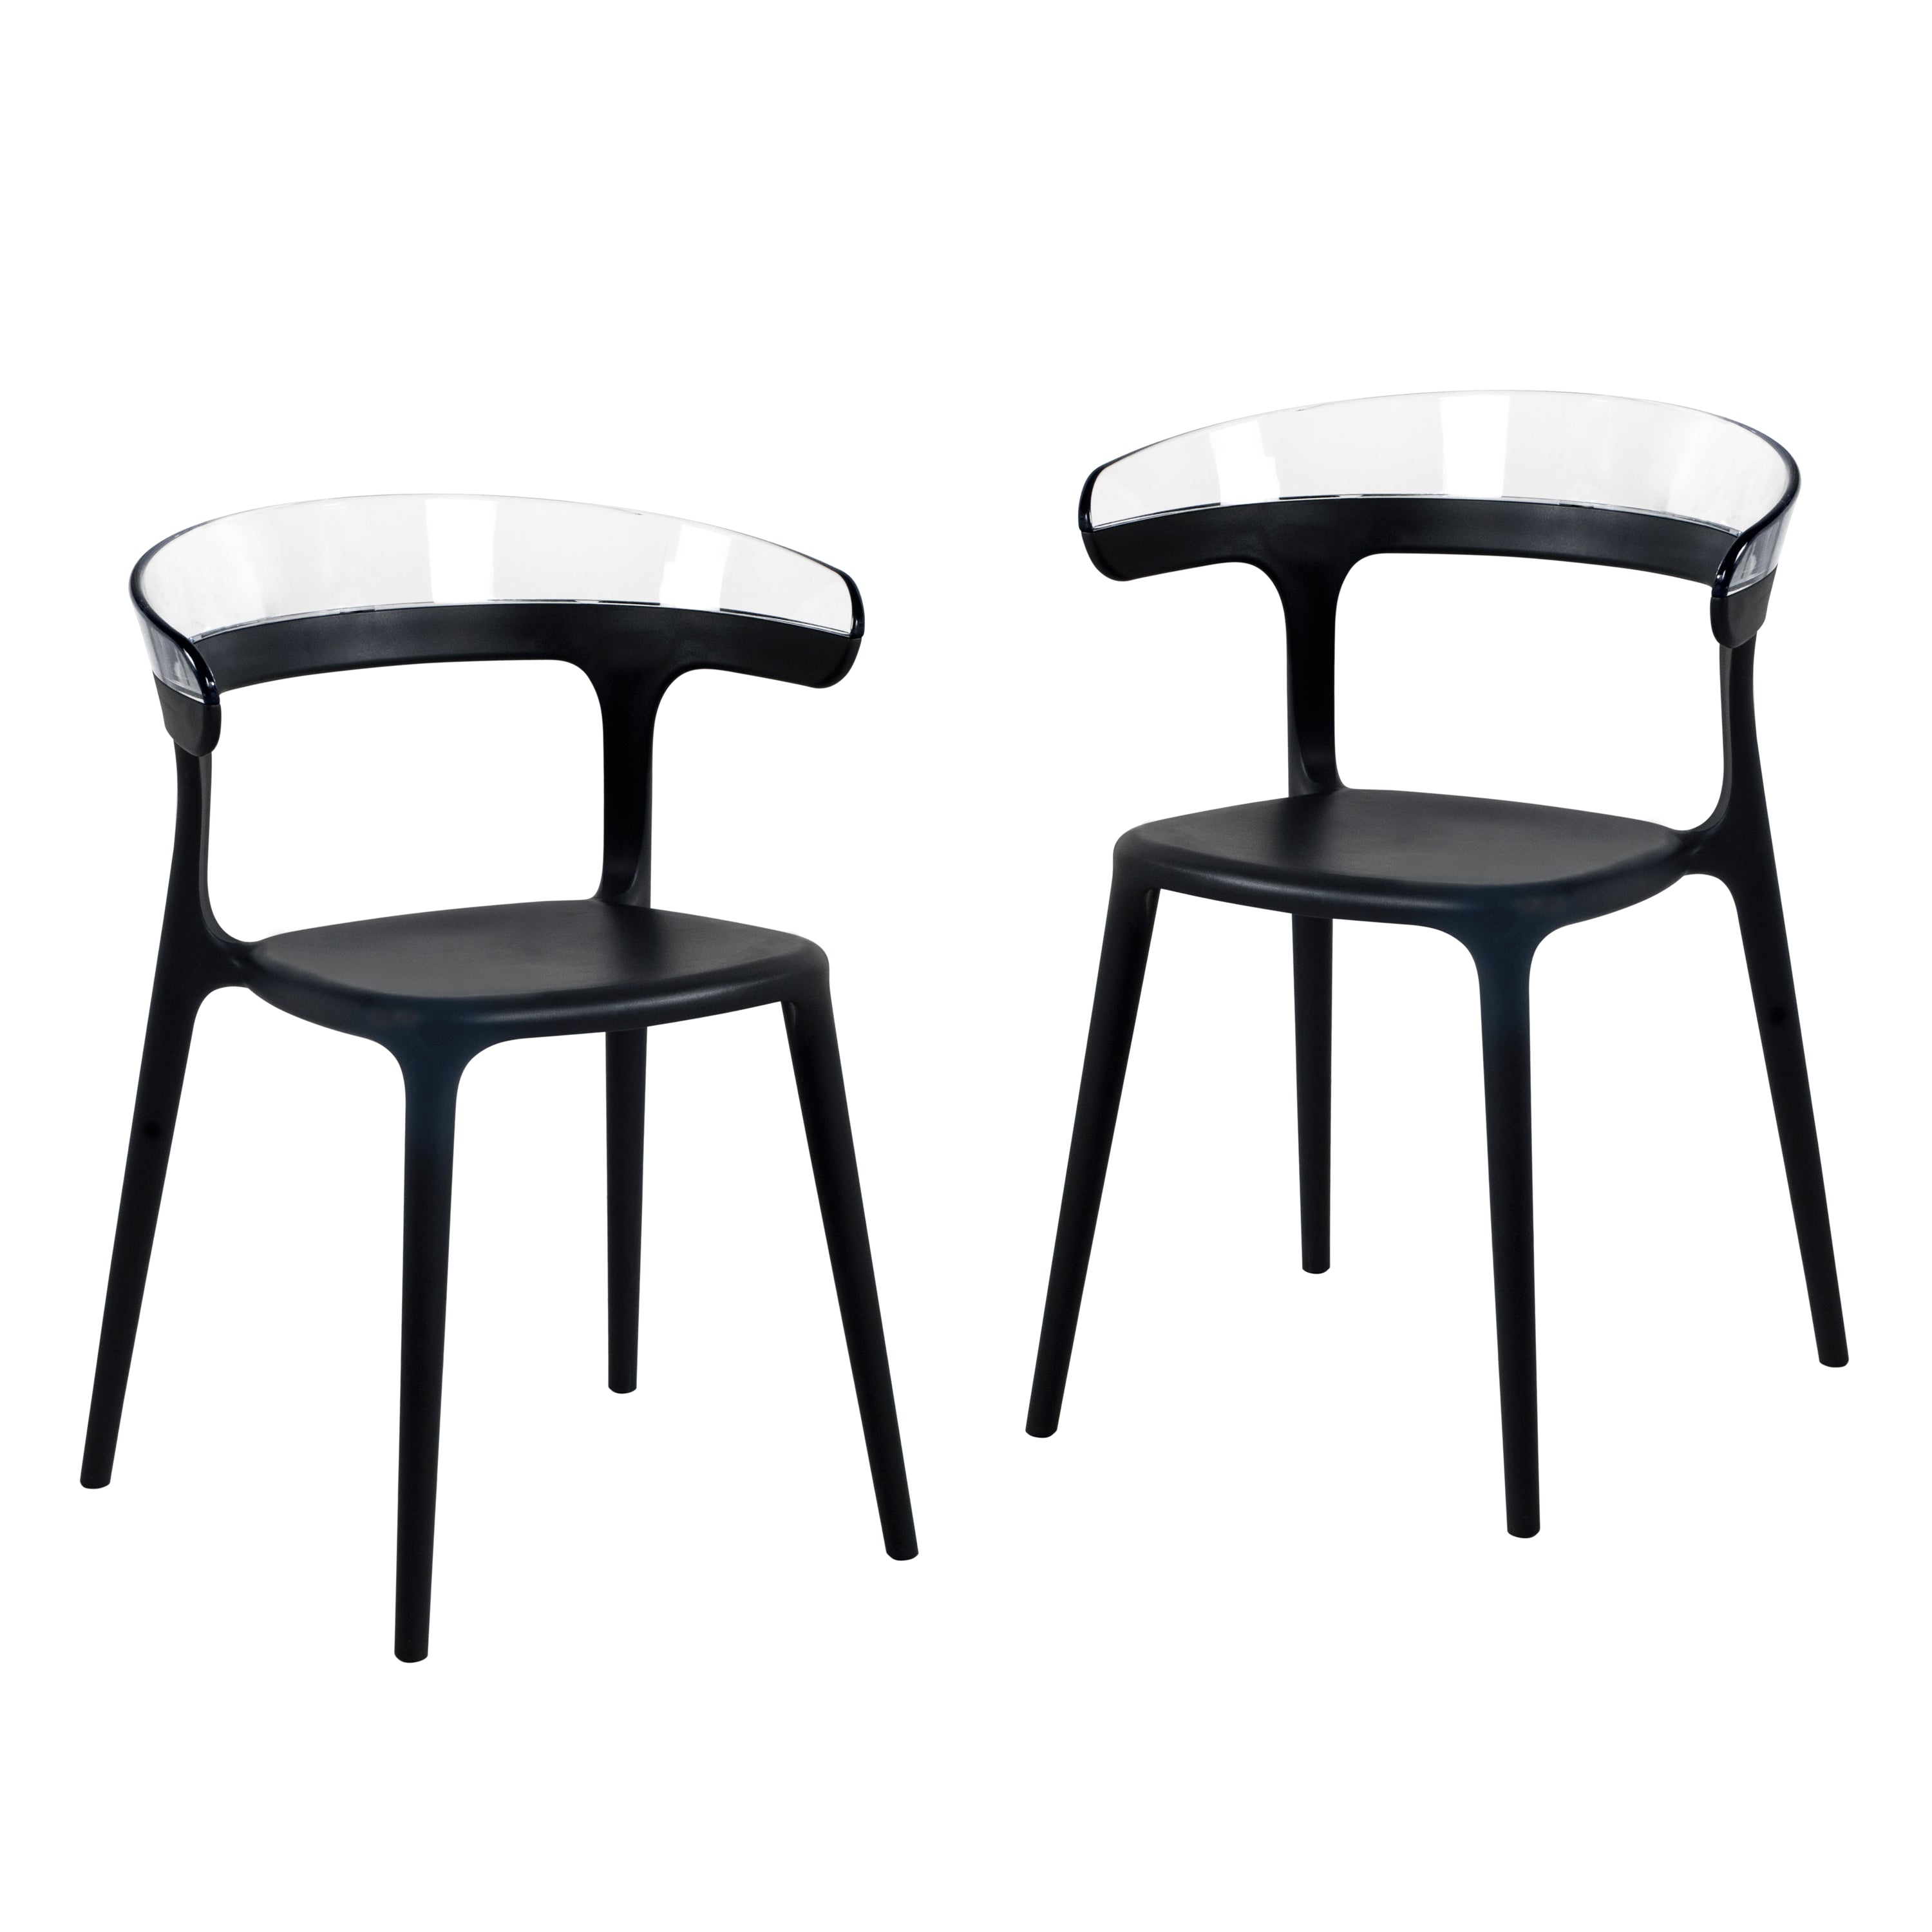 Mia Patio Dining Chair in Black and Clear- (Set of 2)